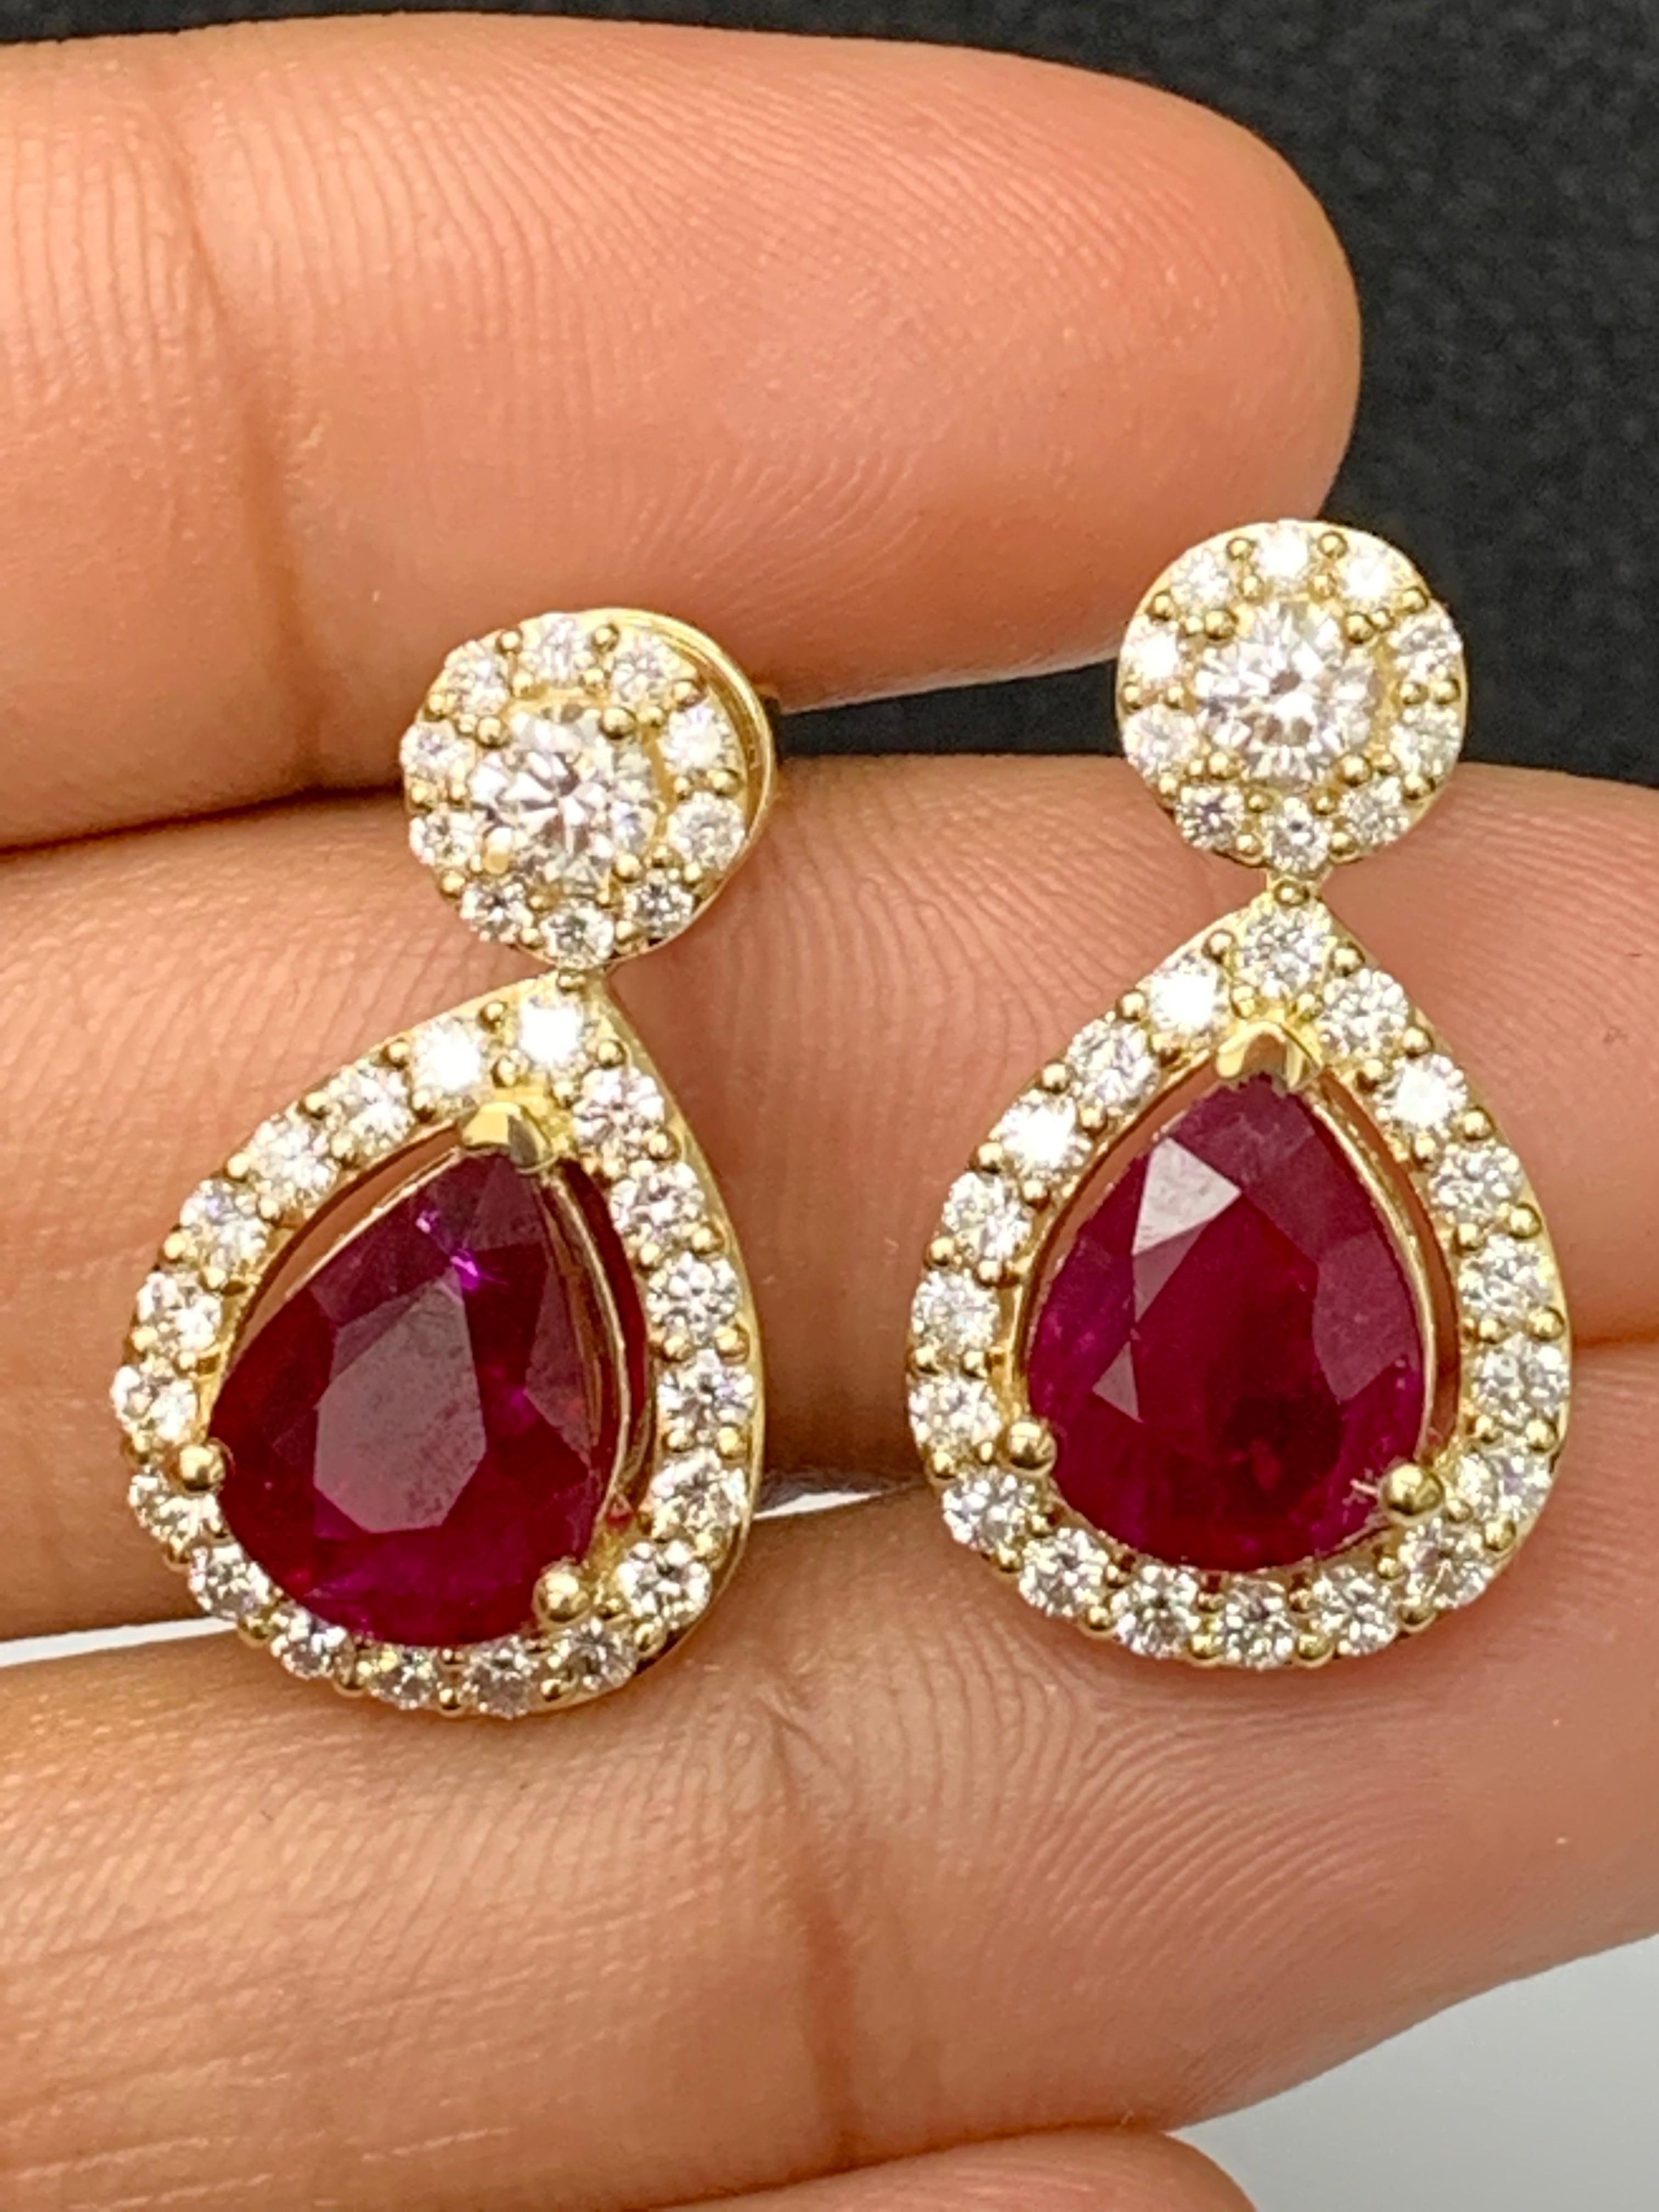 Contemporary 3.56 Carat of Pear Shape Ruby Diamond Drop Earrings in 18K Yellow Gold For Sale